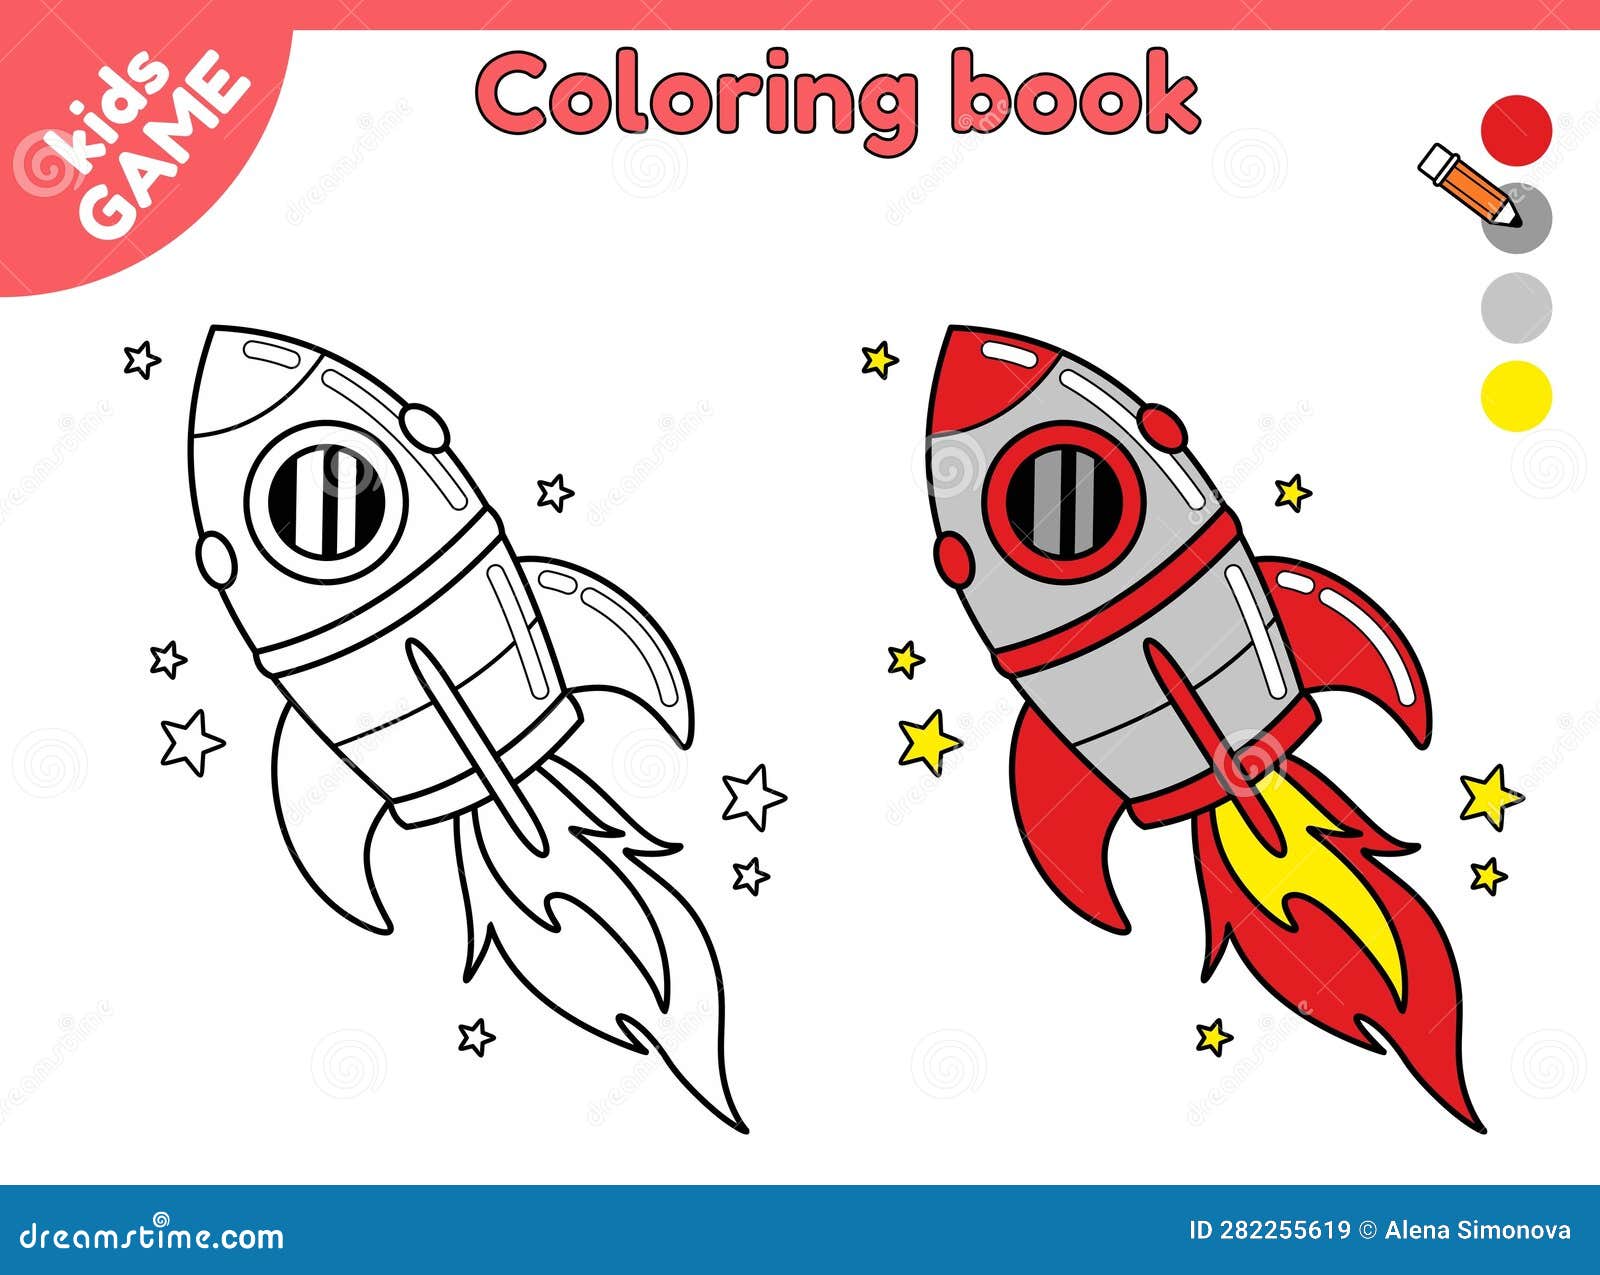 Coloring book with flying spaceship in space stock vector